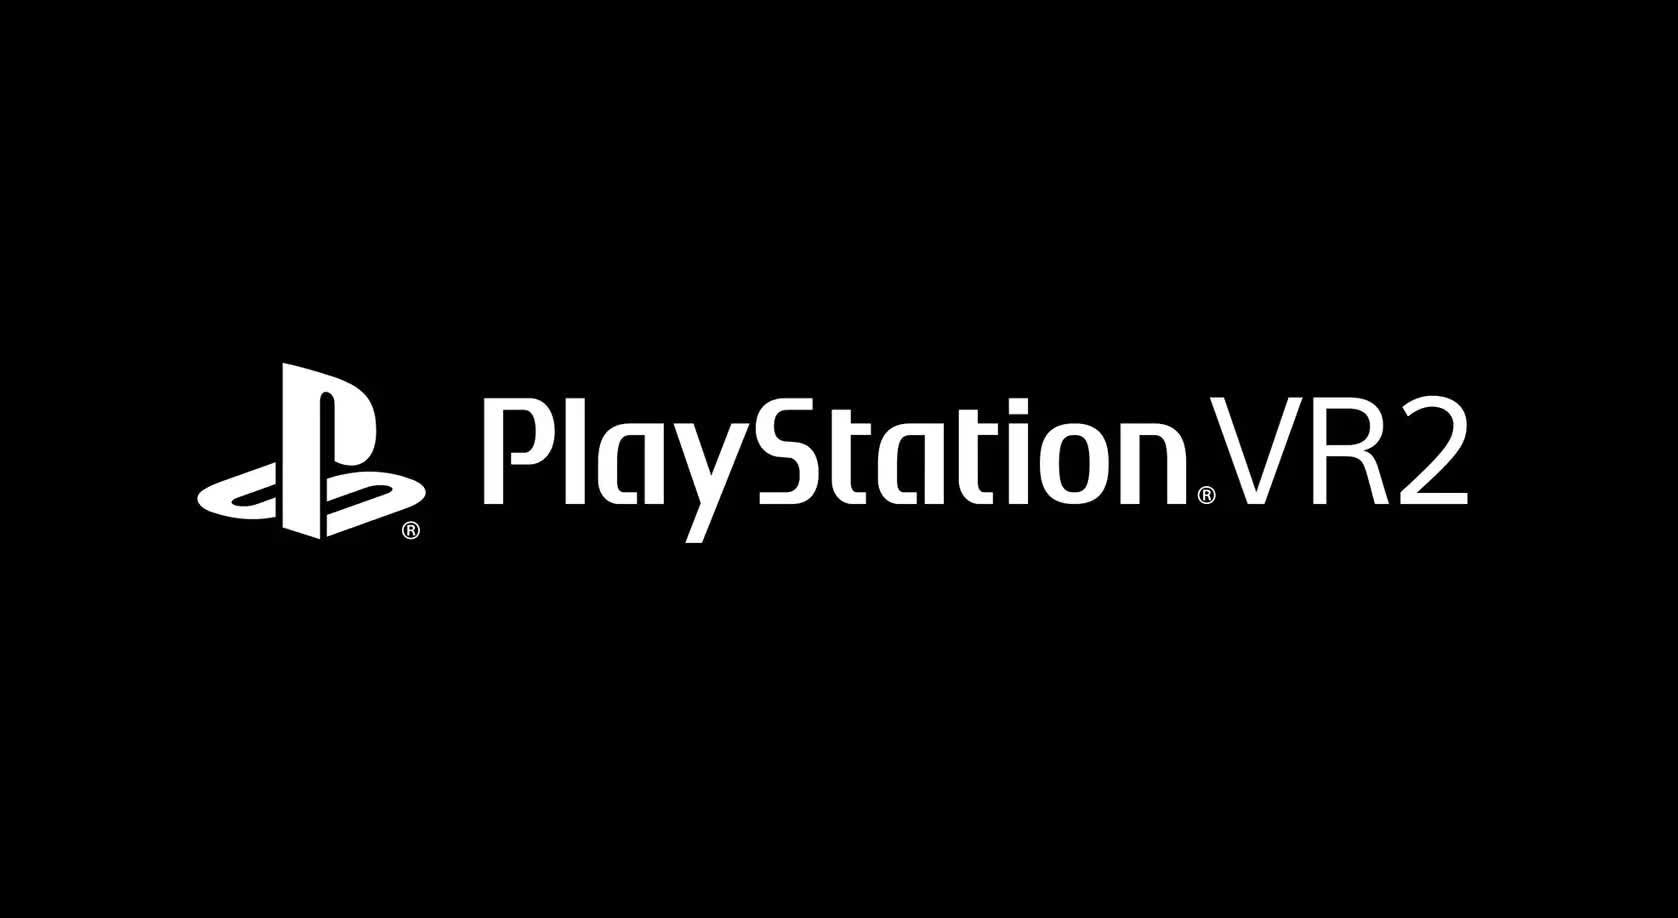 Sony's PlayStation VR2 will use a single cord to deliver 4K HDR gaming at 90/120Hz